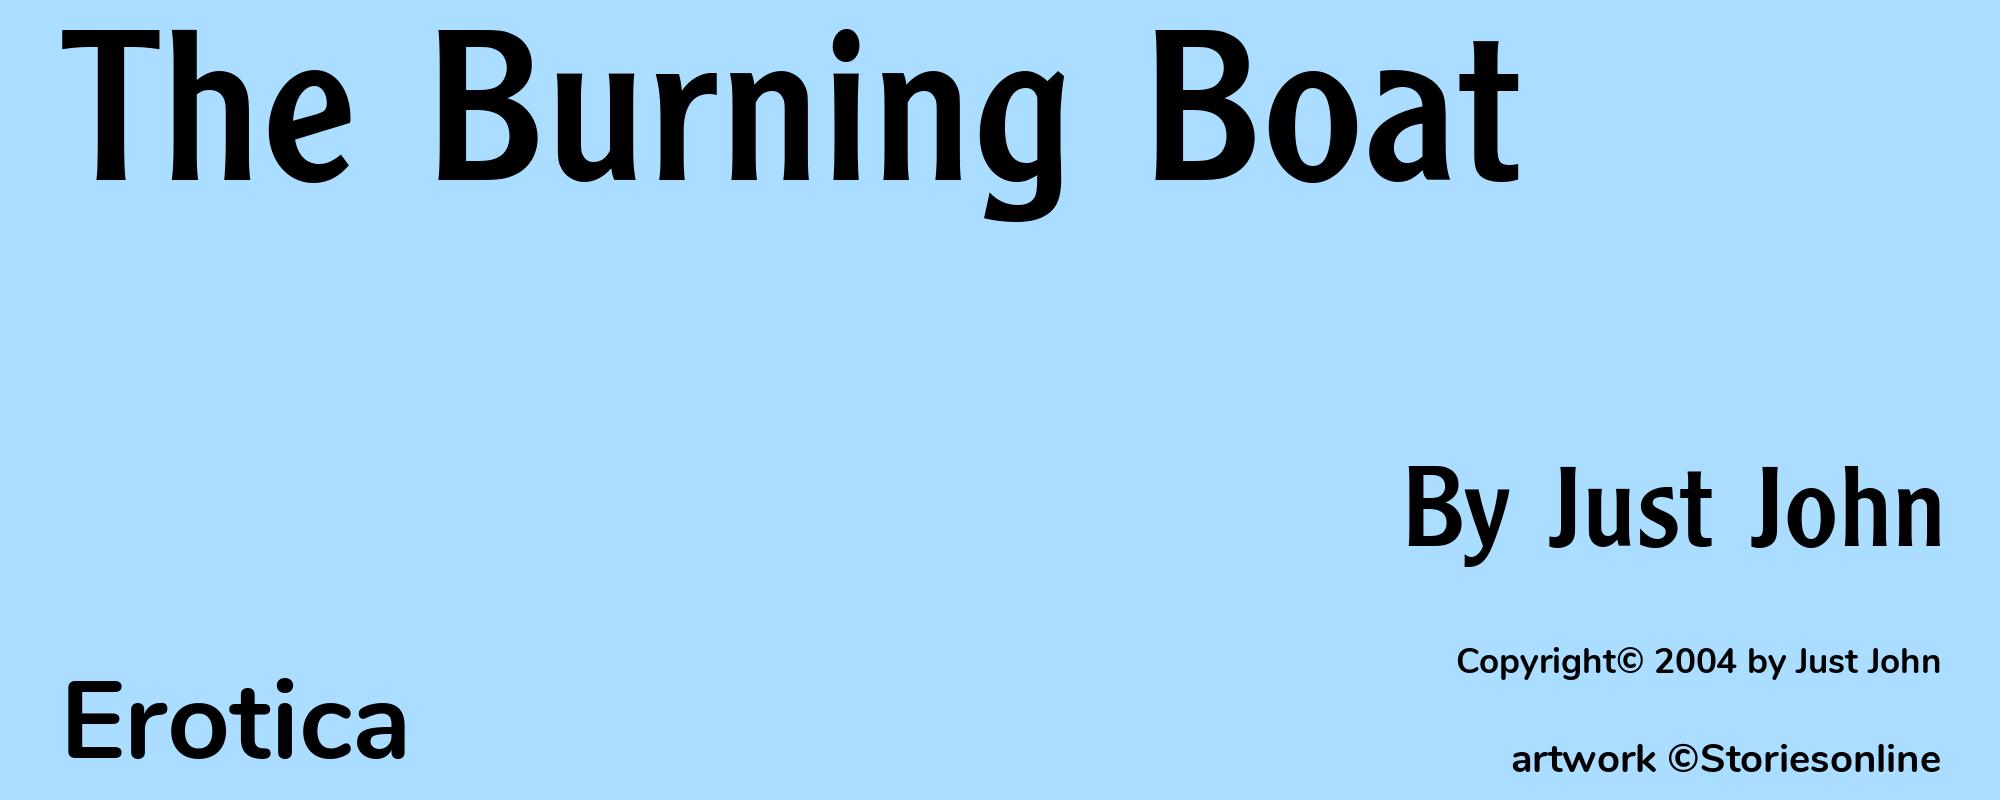 The Burning Boat - Cover